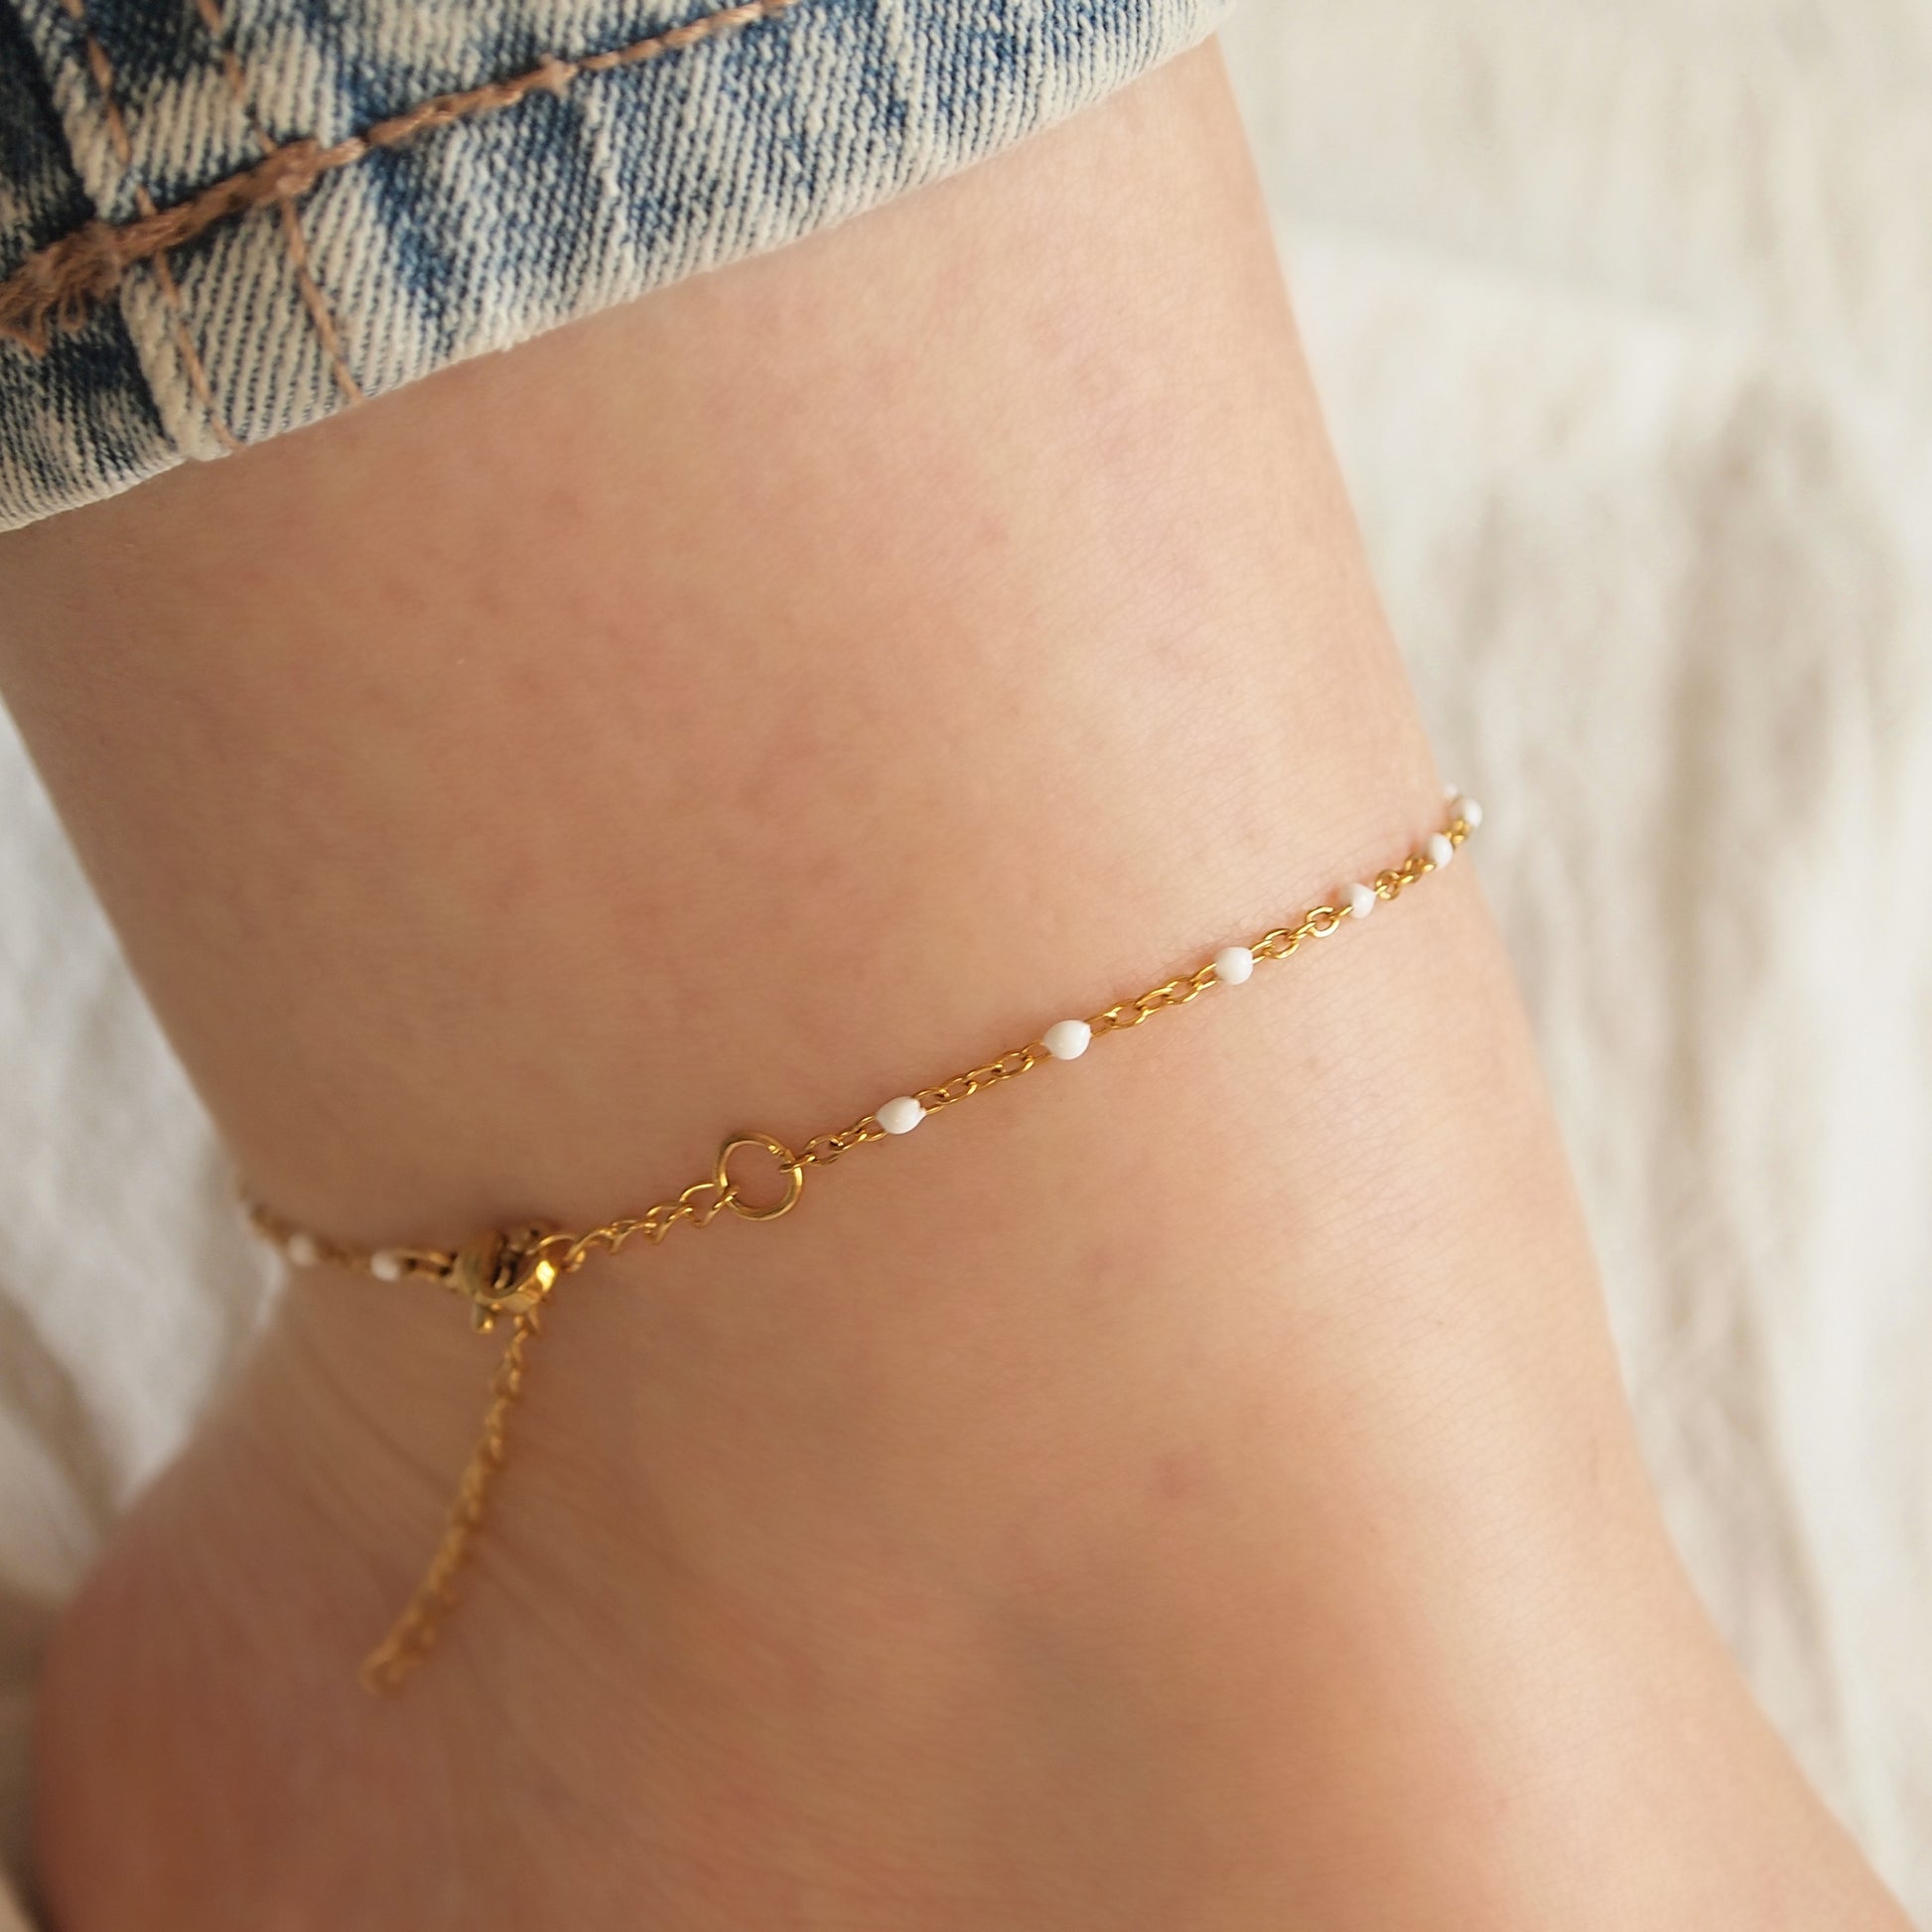 dainty woman ankle bracelet with small white beads